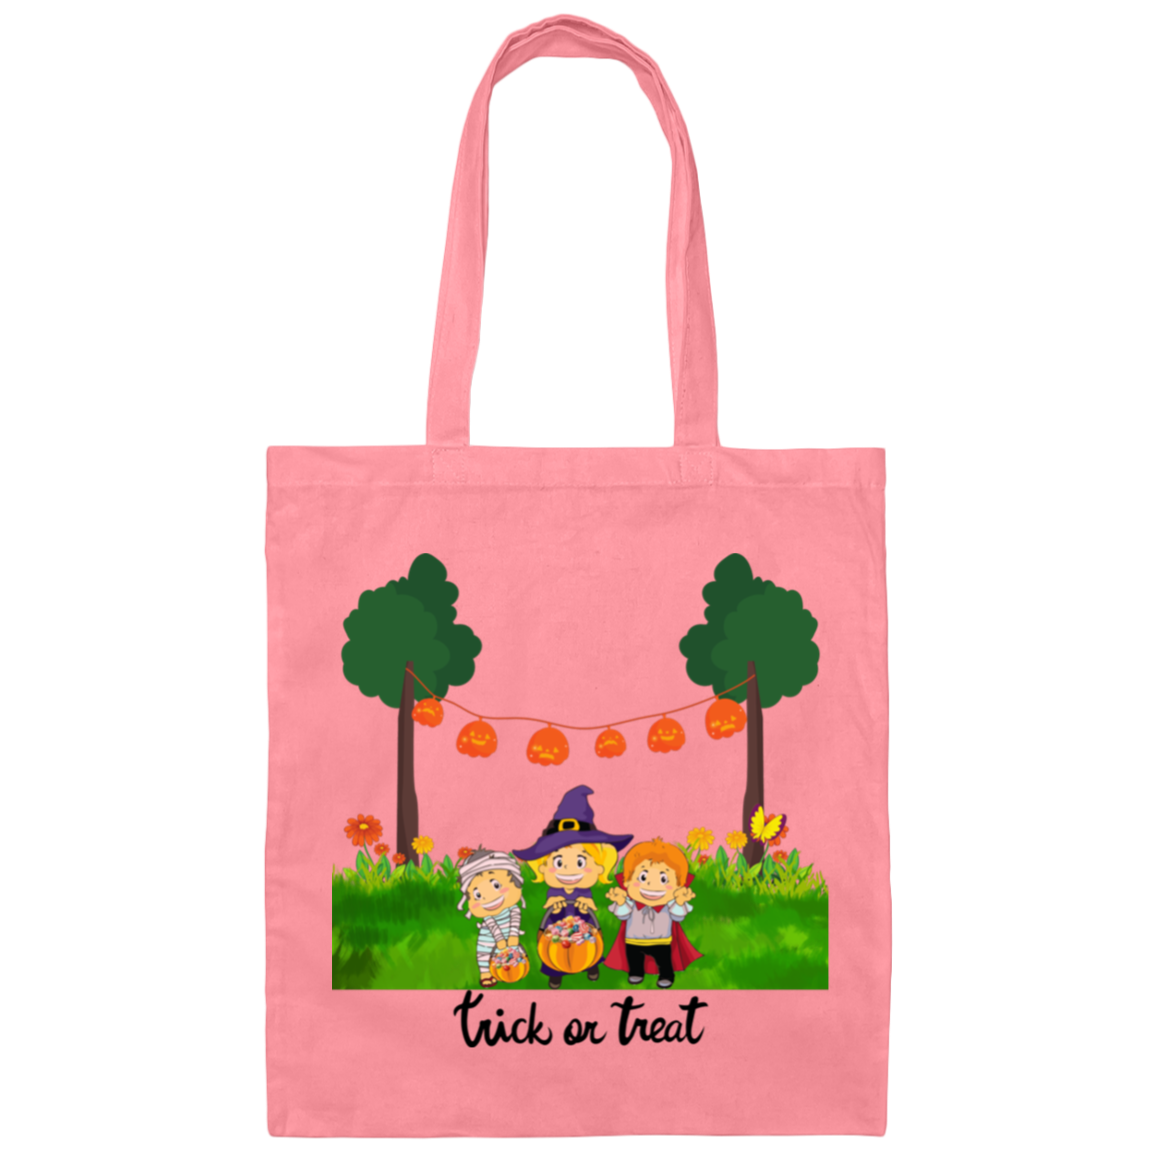 Children with costumes & candy baskets, Front & Back Design - Trick or Treat Bag